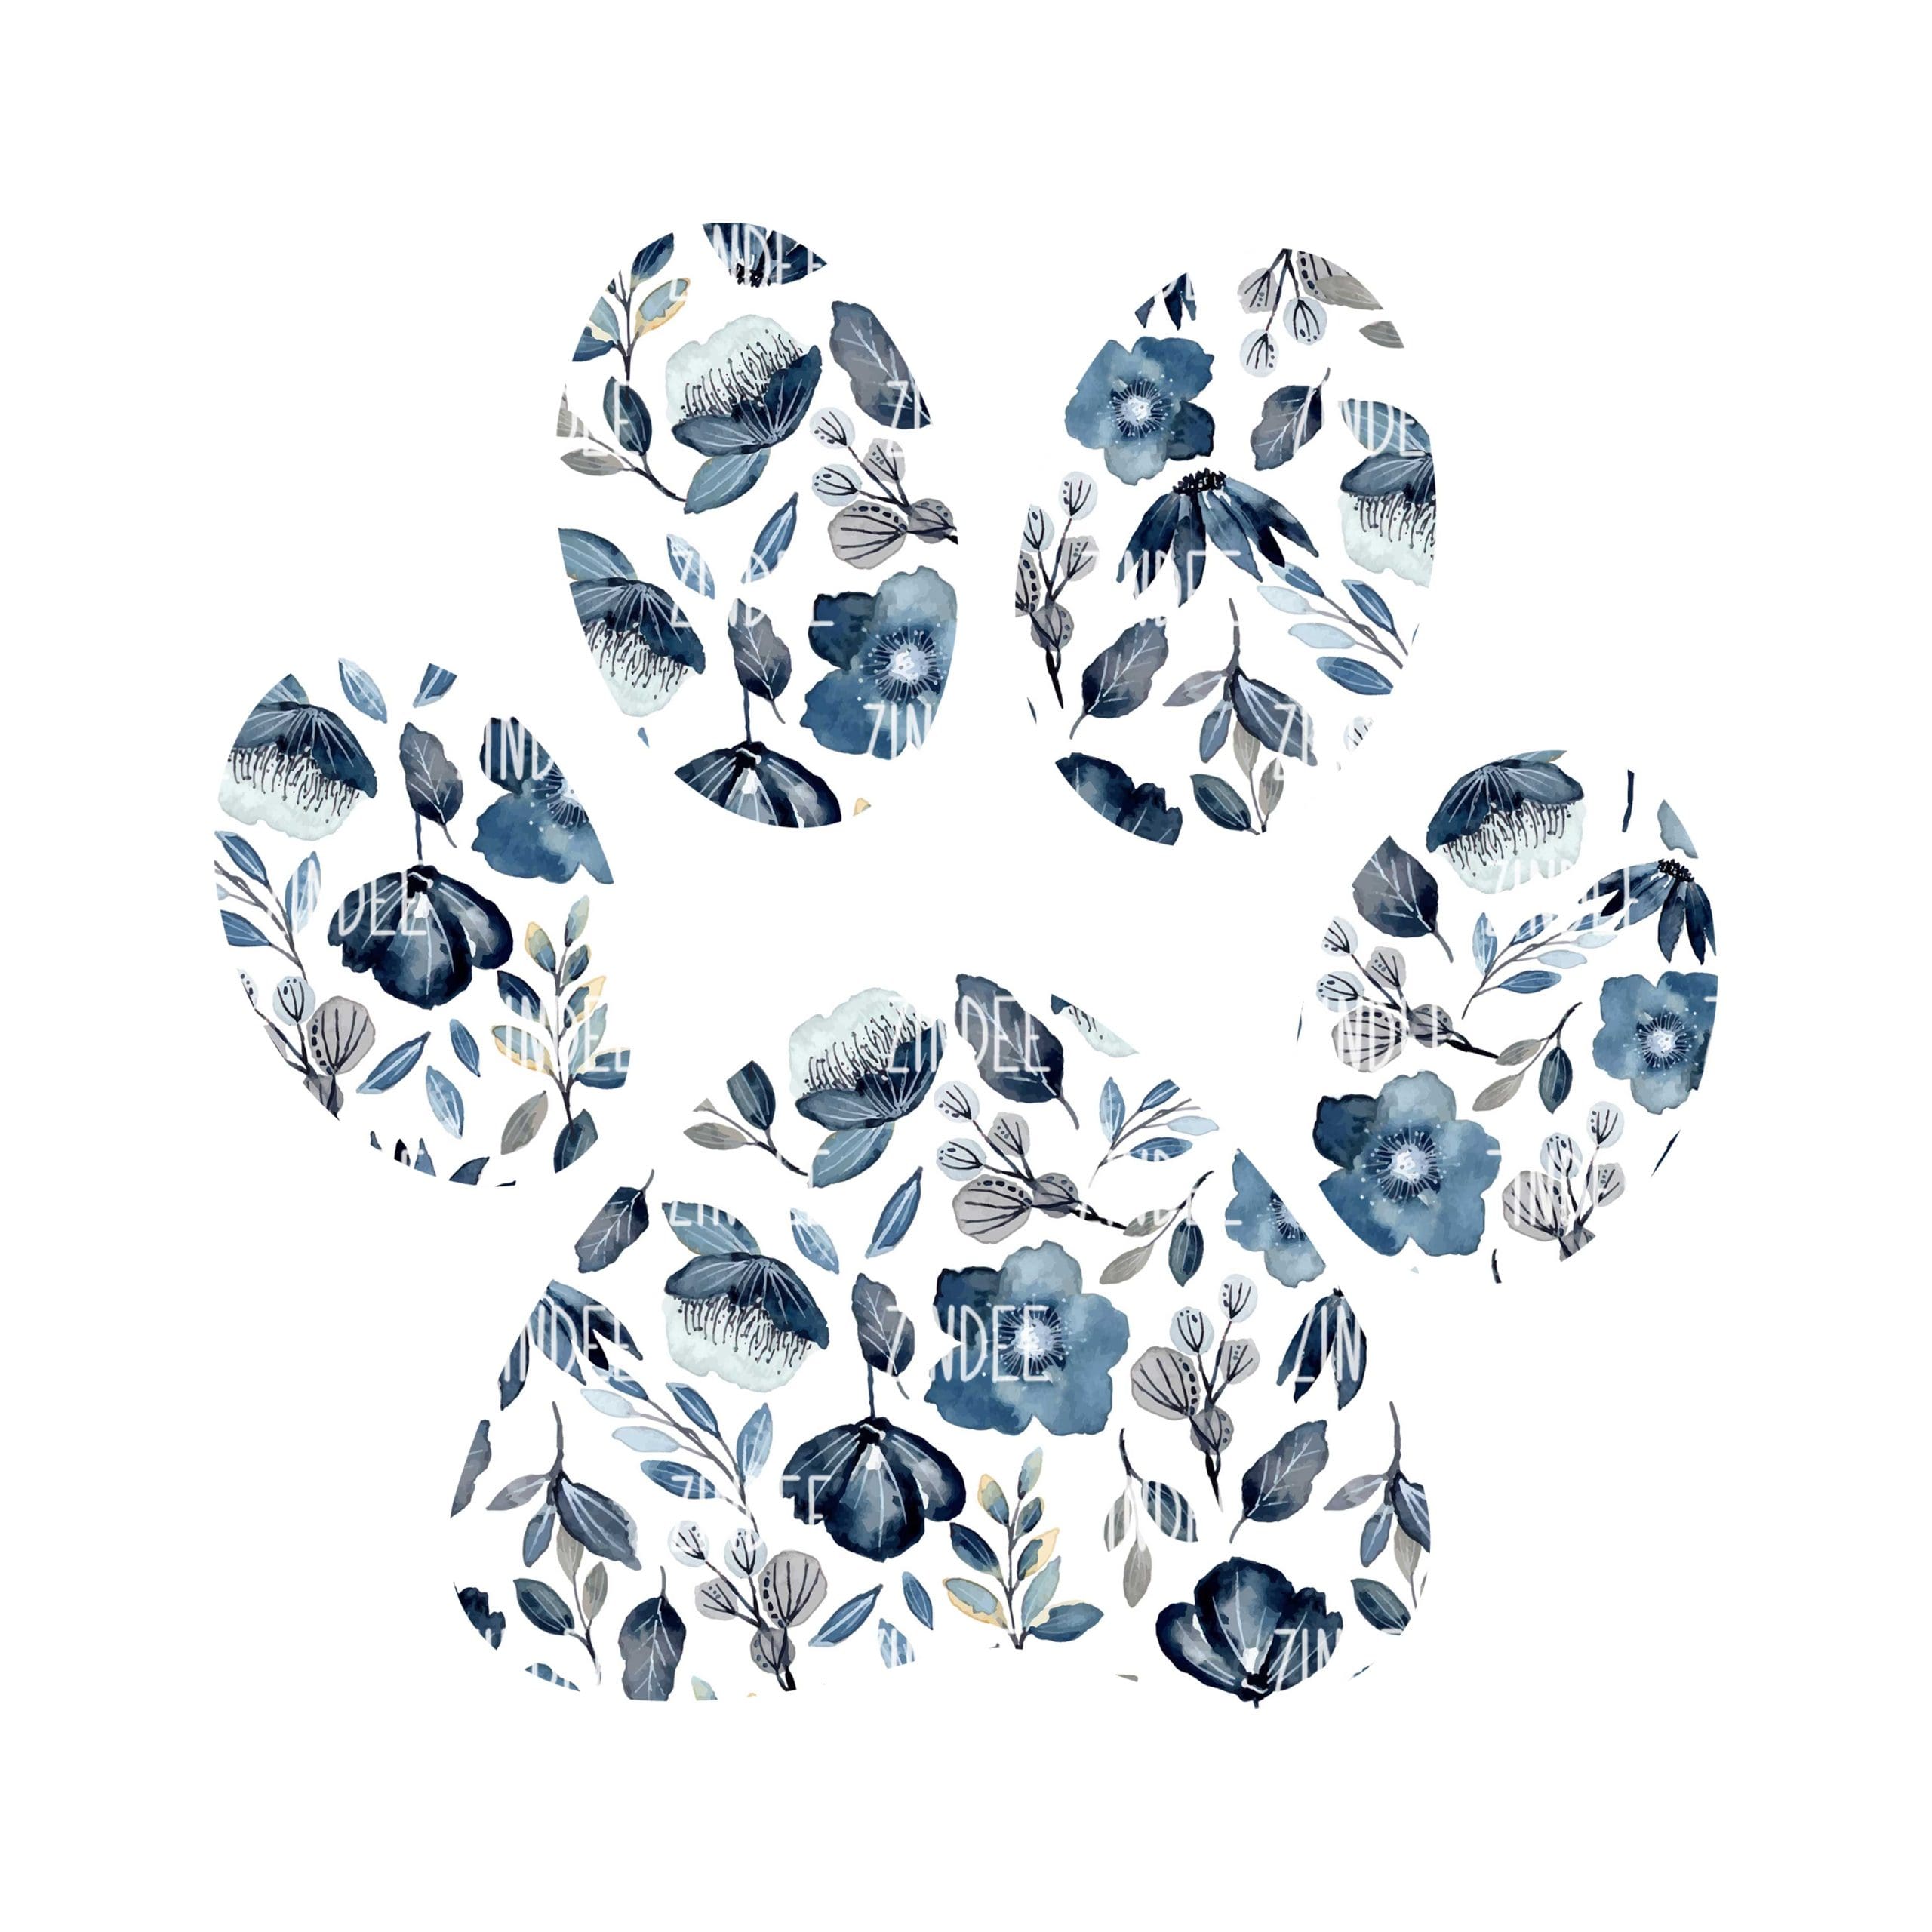 https://zindee.com/wp-content/uploads/2023/10/floral-paw-print-ss-scaled-1.jpg